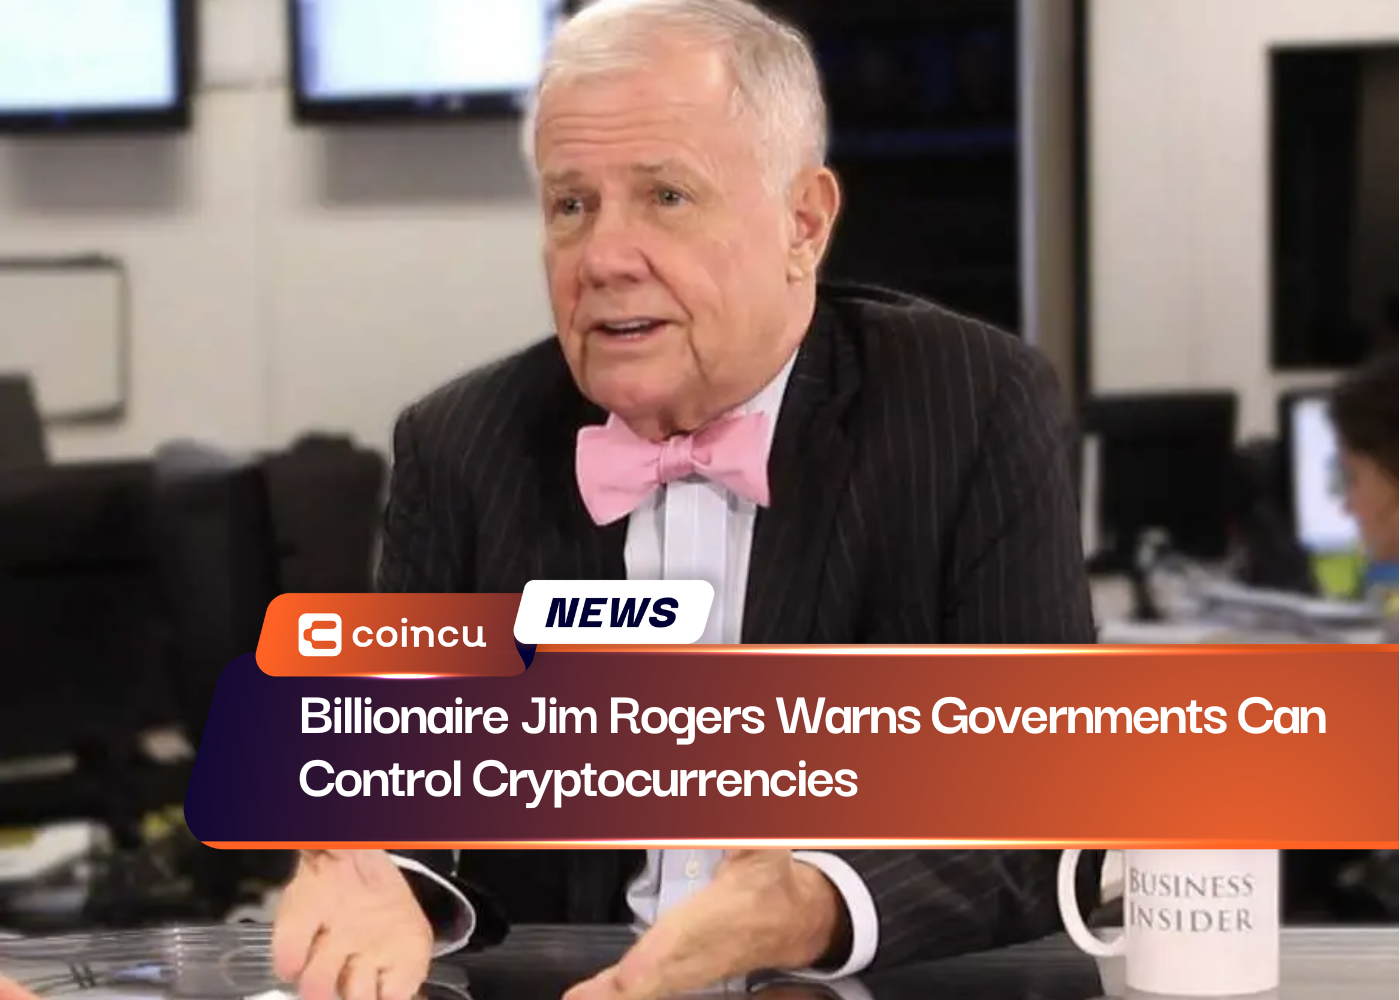 Billionaire Jim Rogers Warns Governments Can Control Cryptocurrencies